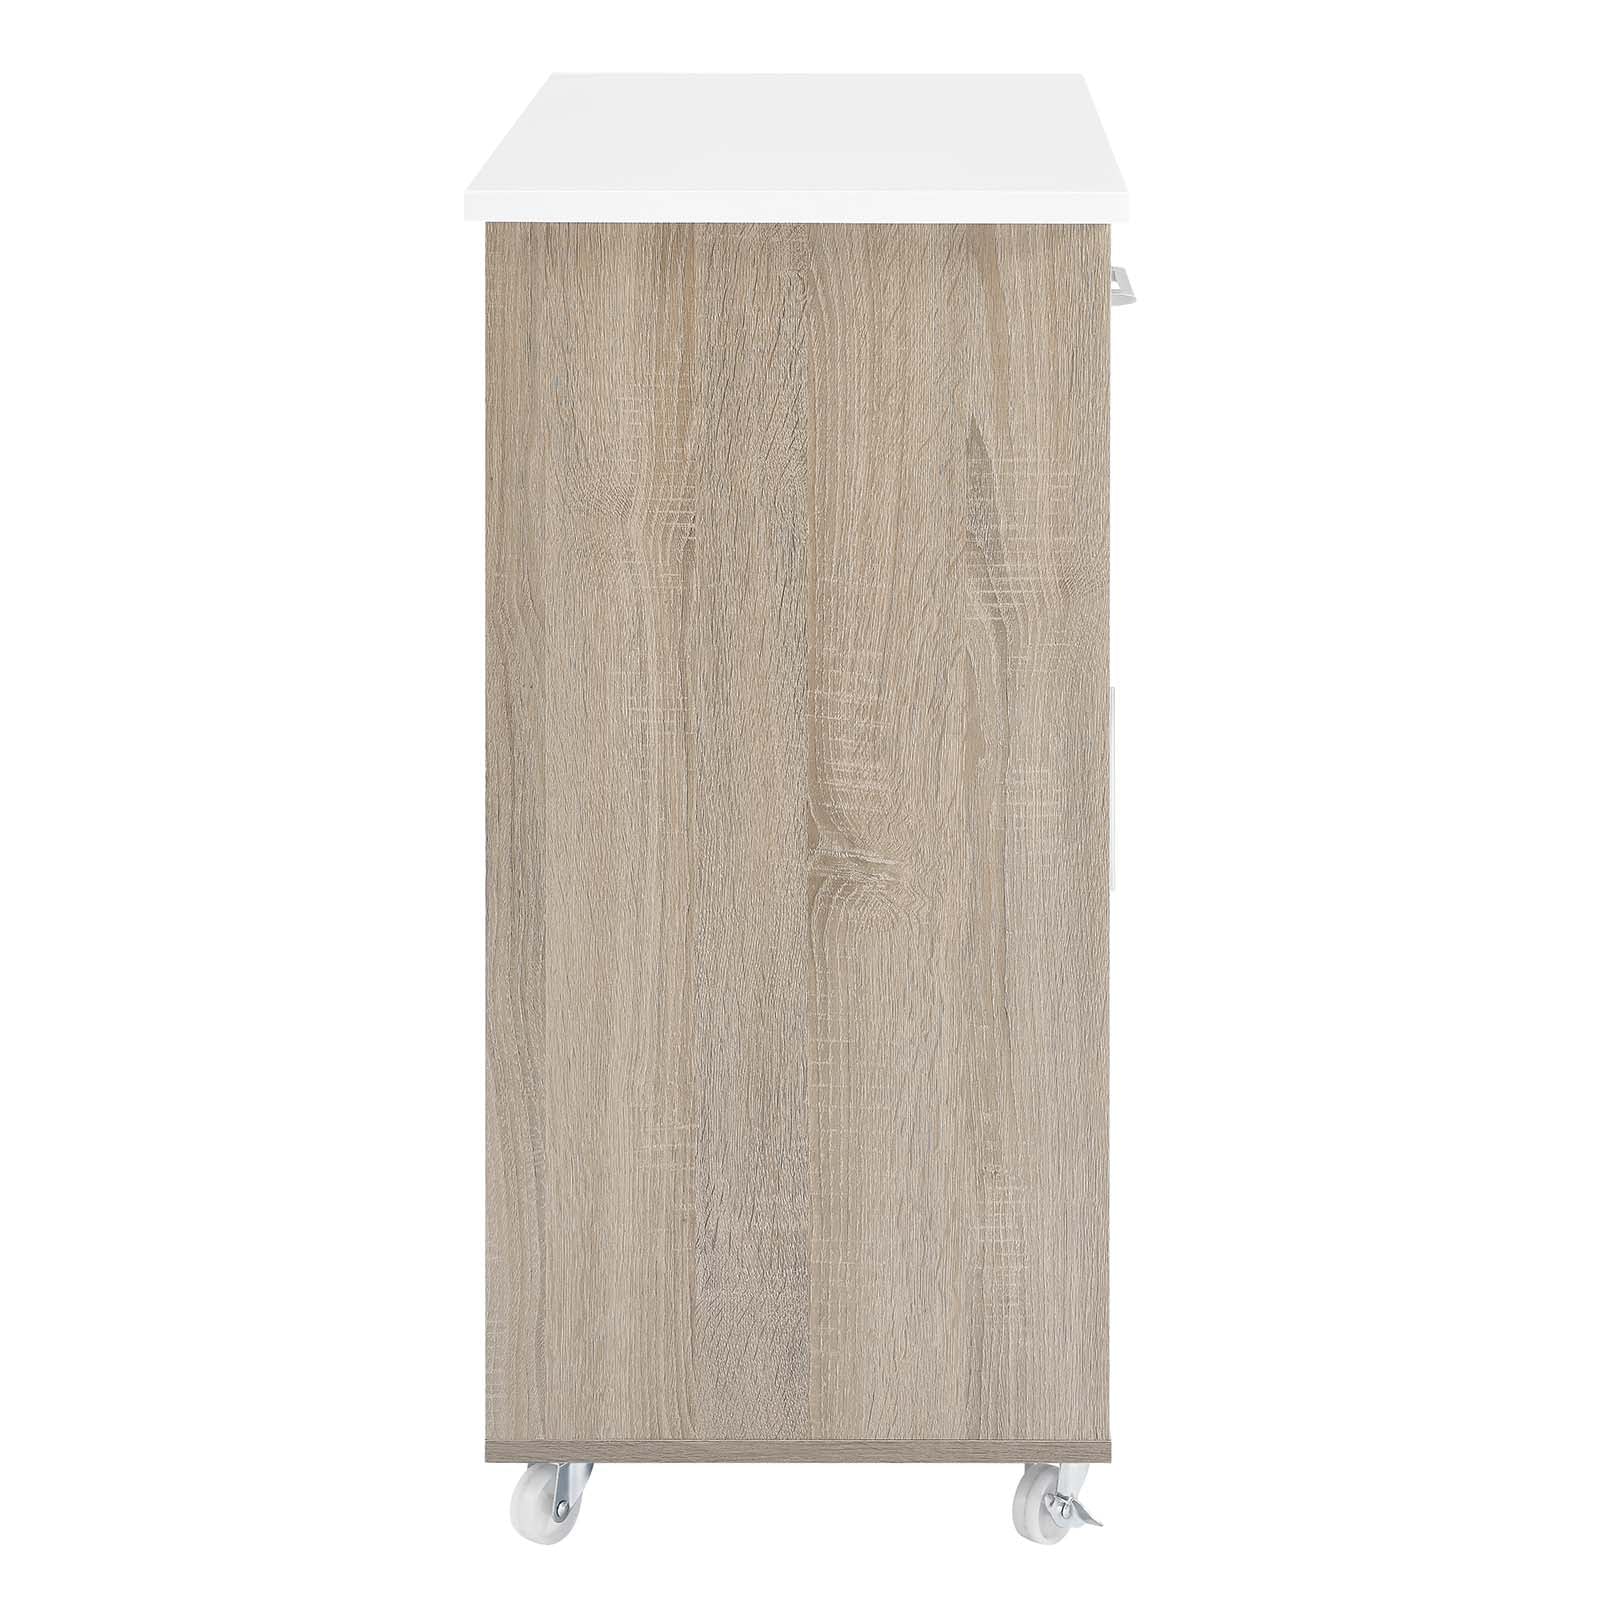 Culinary Kitchen Cart With Towel Bar - East Shore Modern Home Furnishings